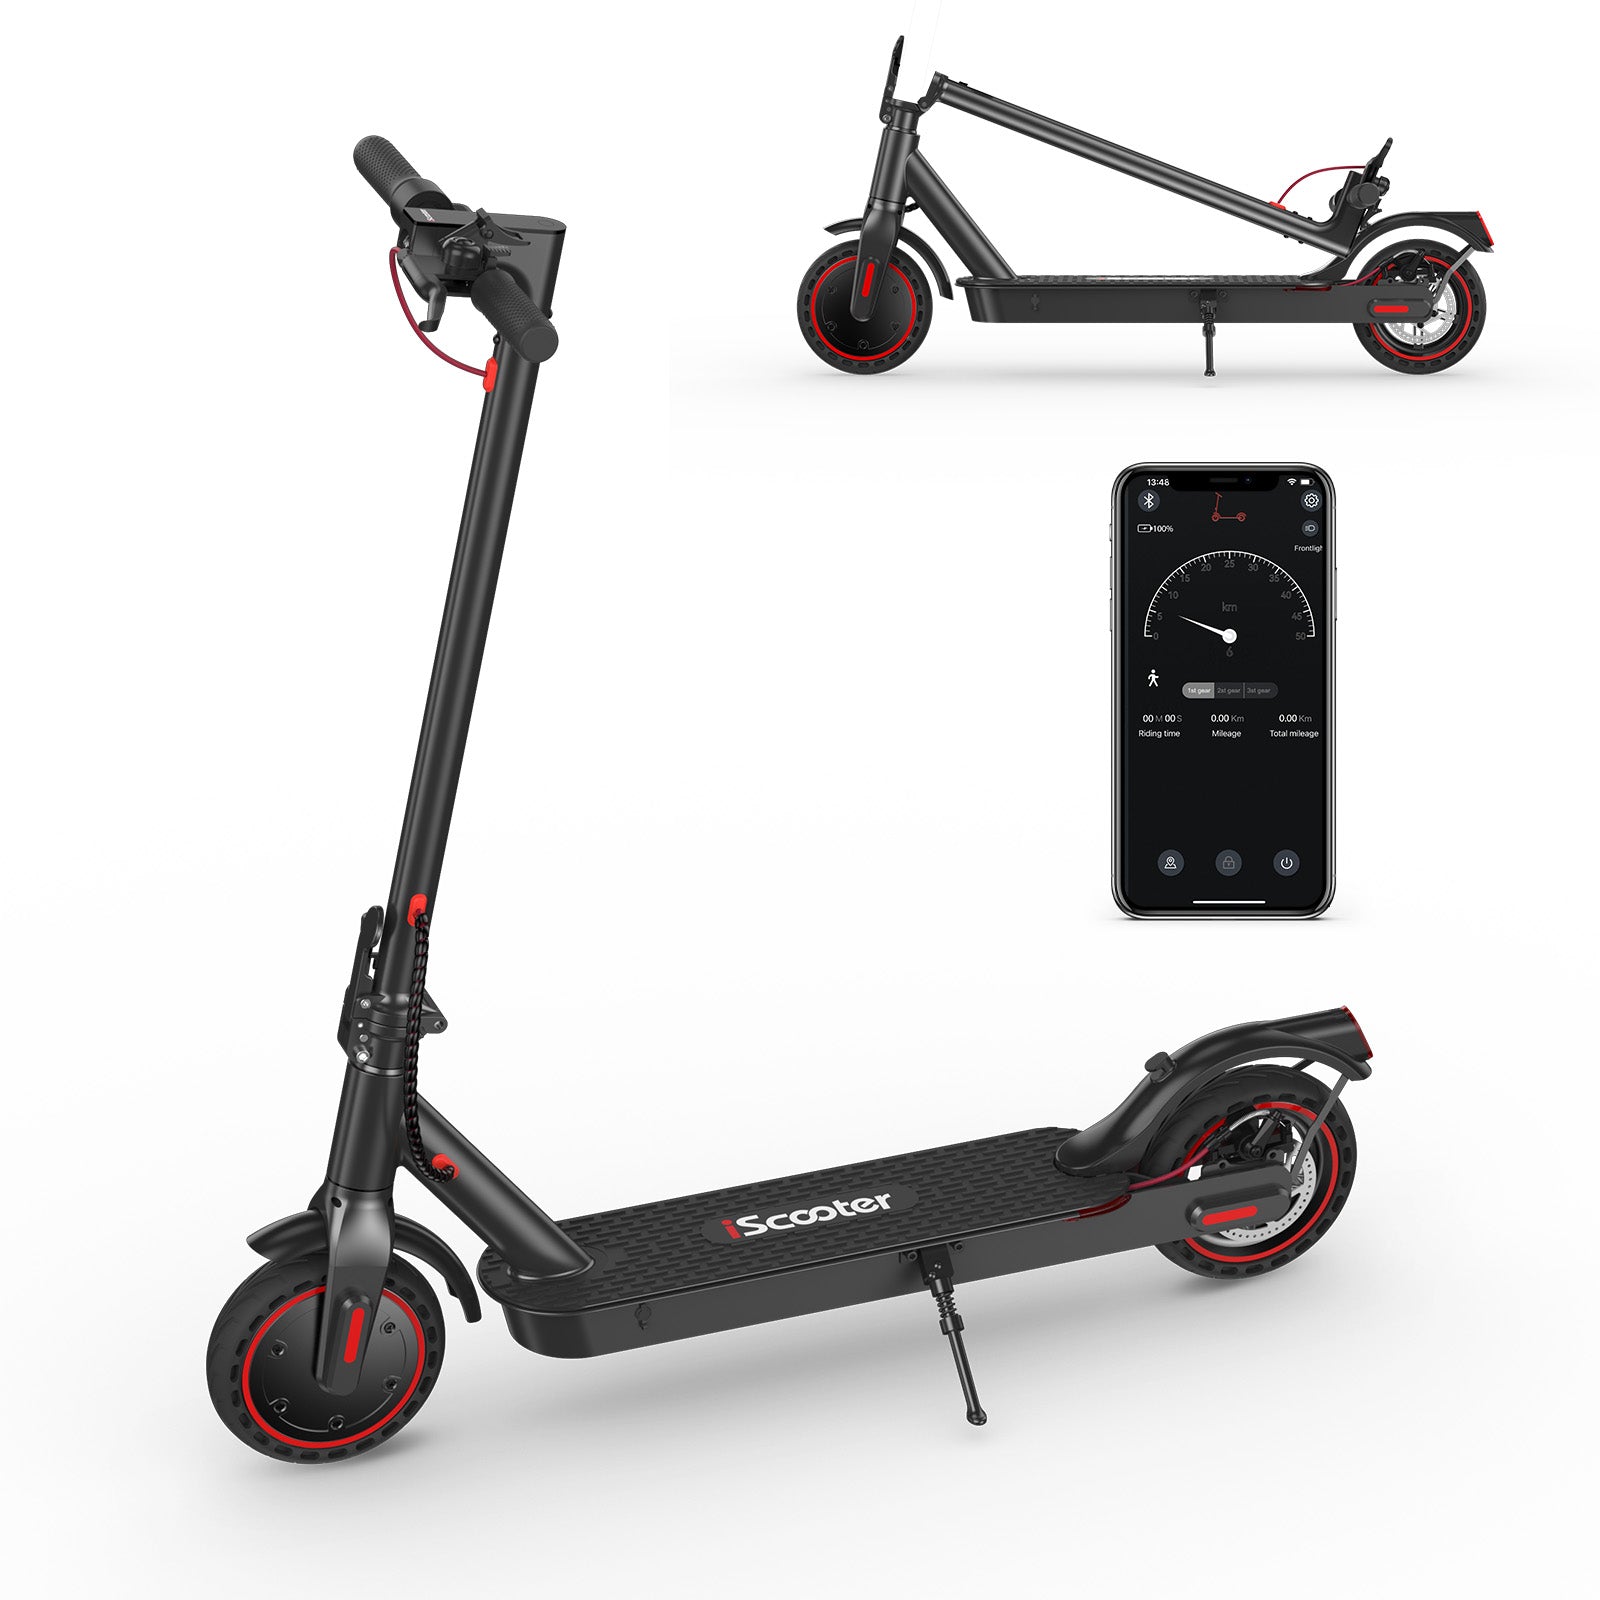 City Scooter Electric Scooter DIY Balance Electric Scooter Accelerator -  China China Factory Scooter and Electric Scooter Supplier price